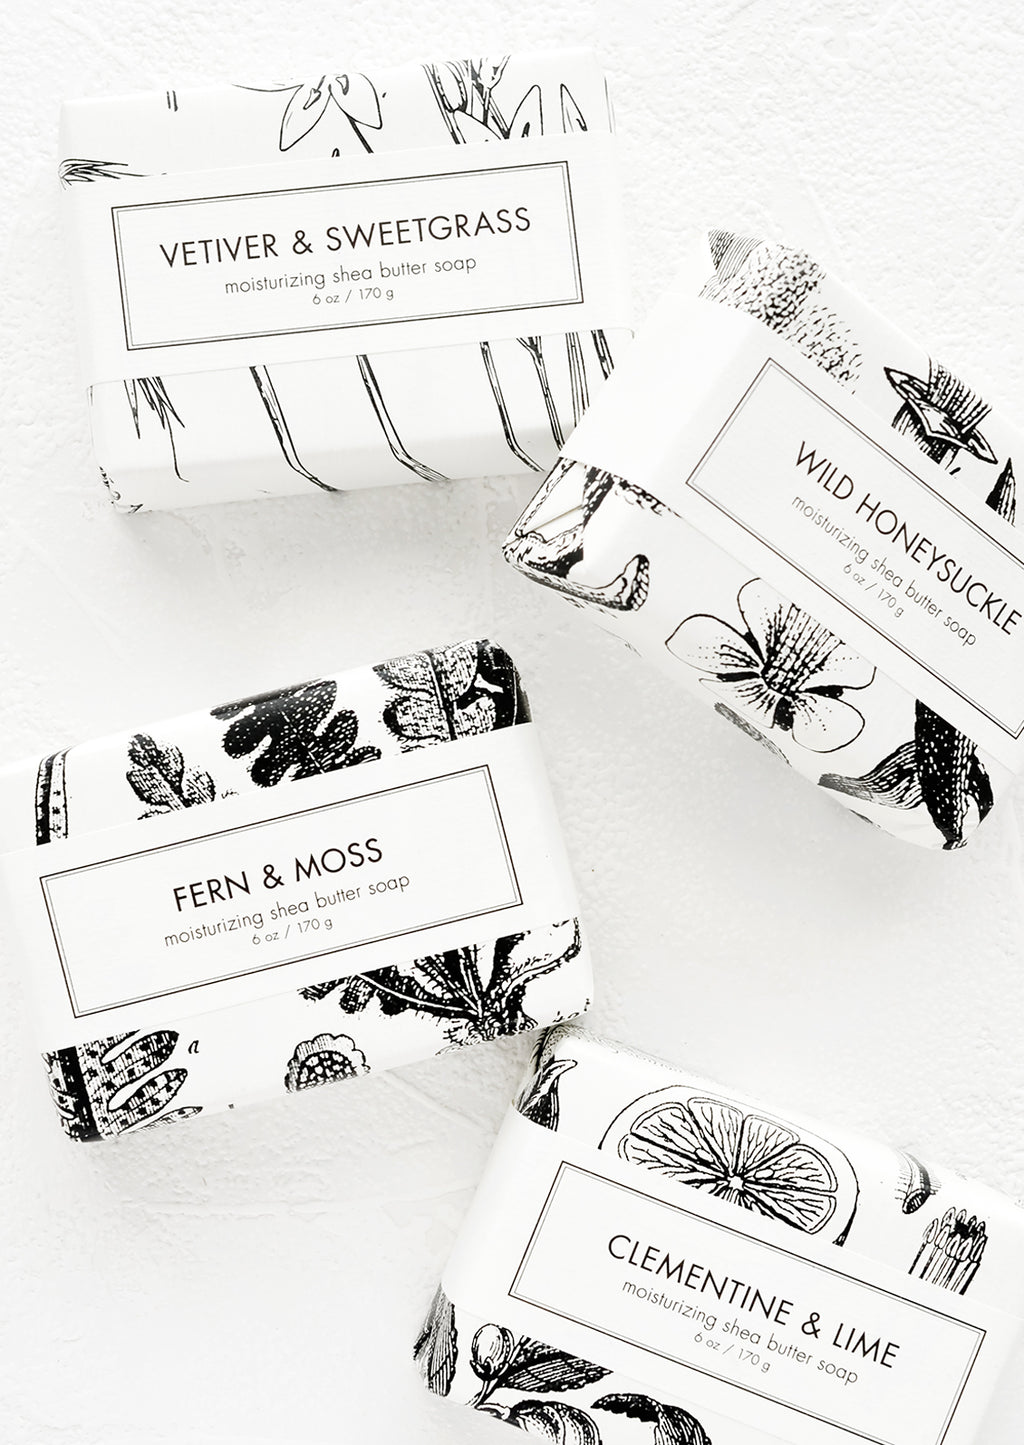 1: Four bars of soap in black & white botanical graphic packaging.